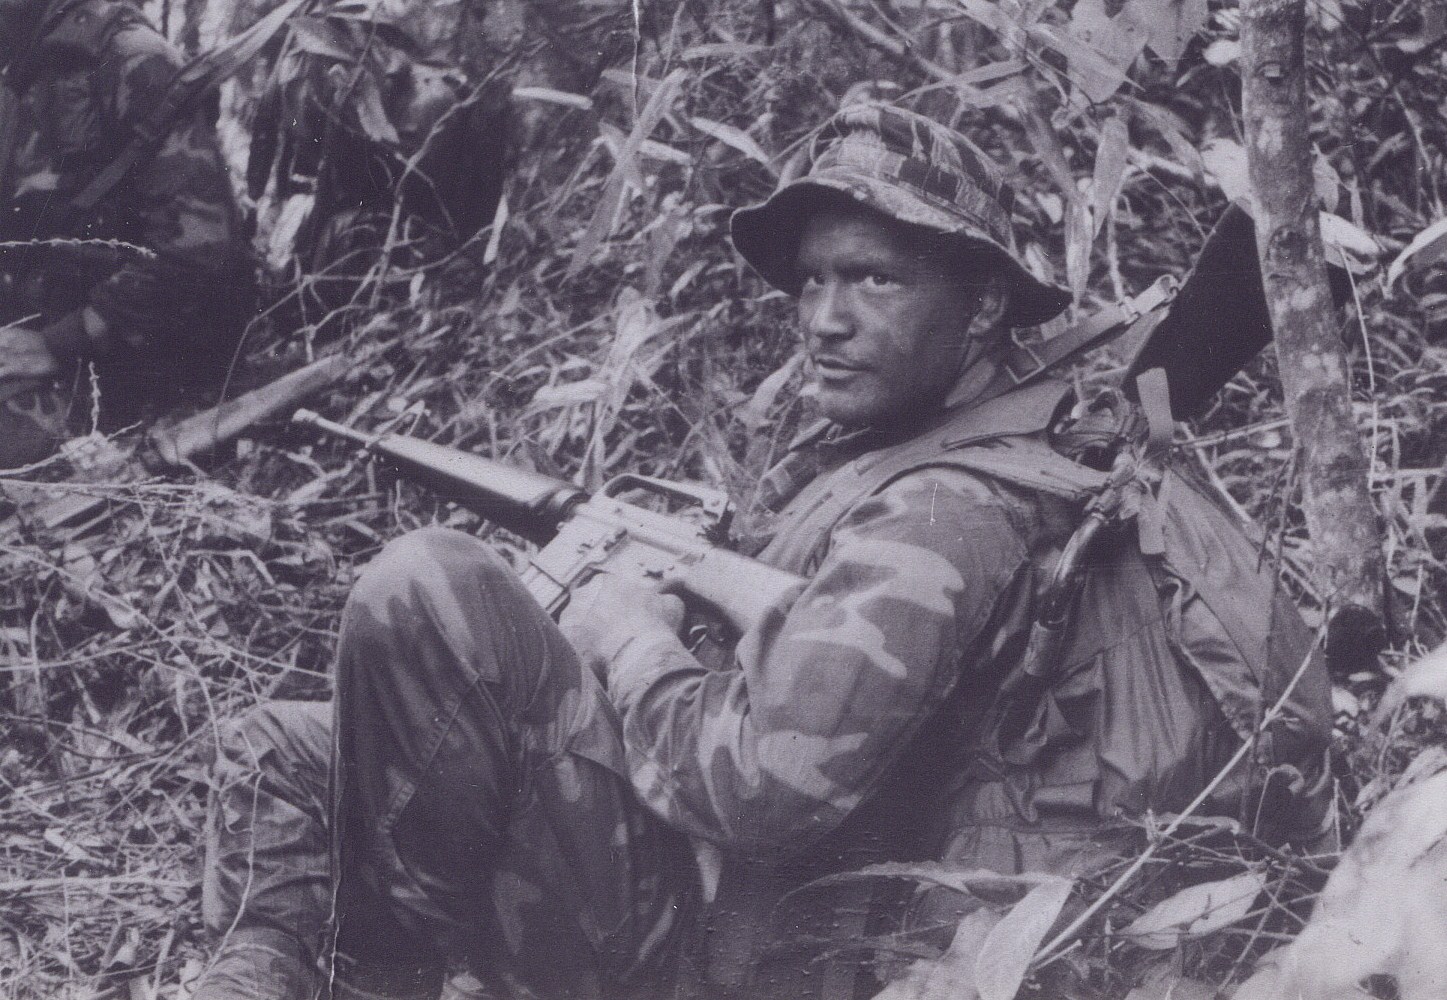 SGT Mark A Miller - Team 11 E Company - 20th Infantry ABN Long Range Patrol Op at Tuy Hoa on the Day Before TET 1968